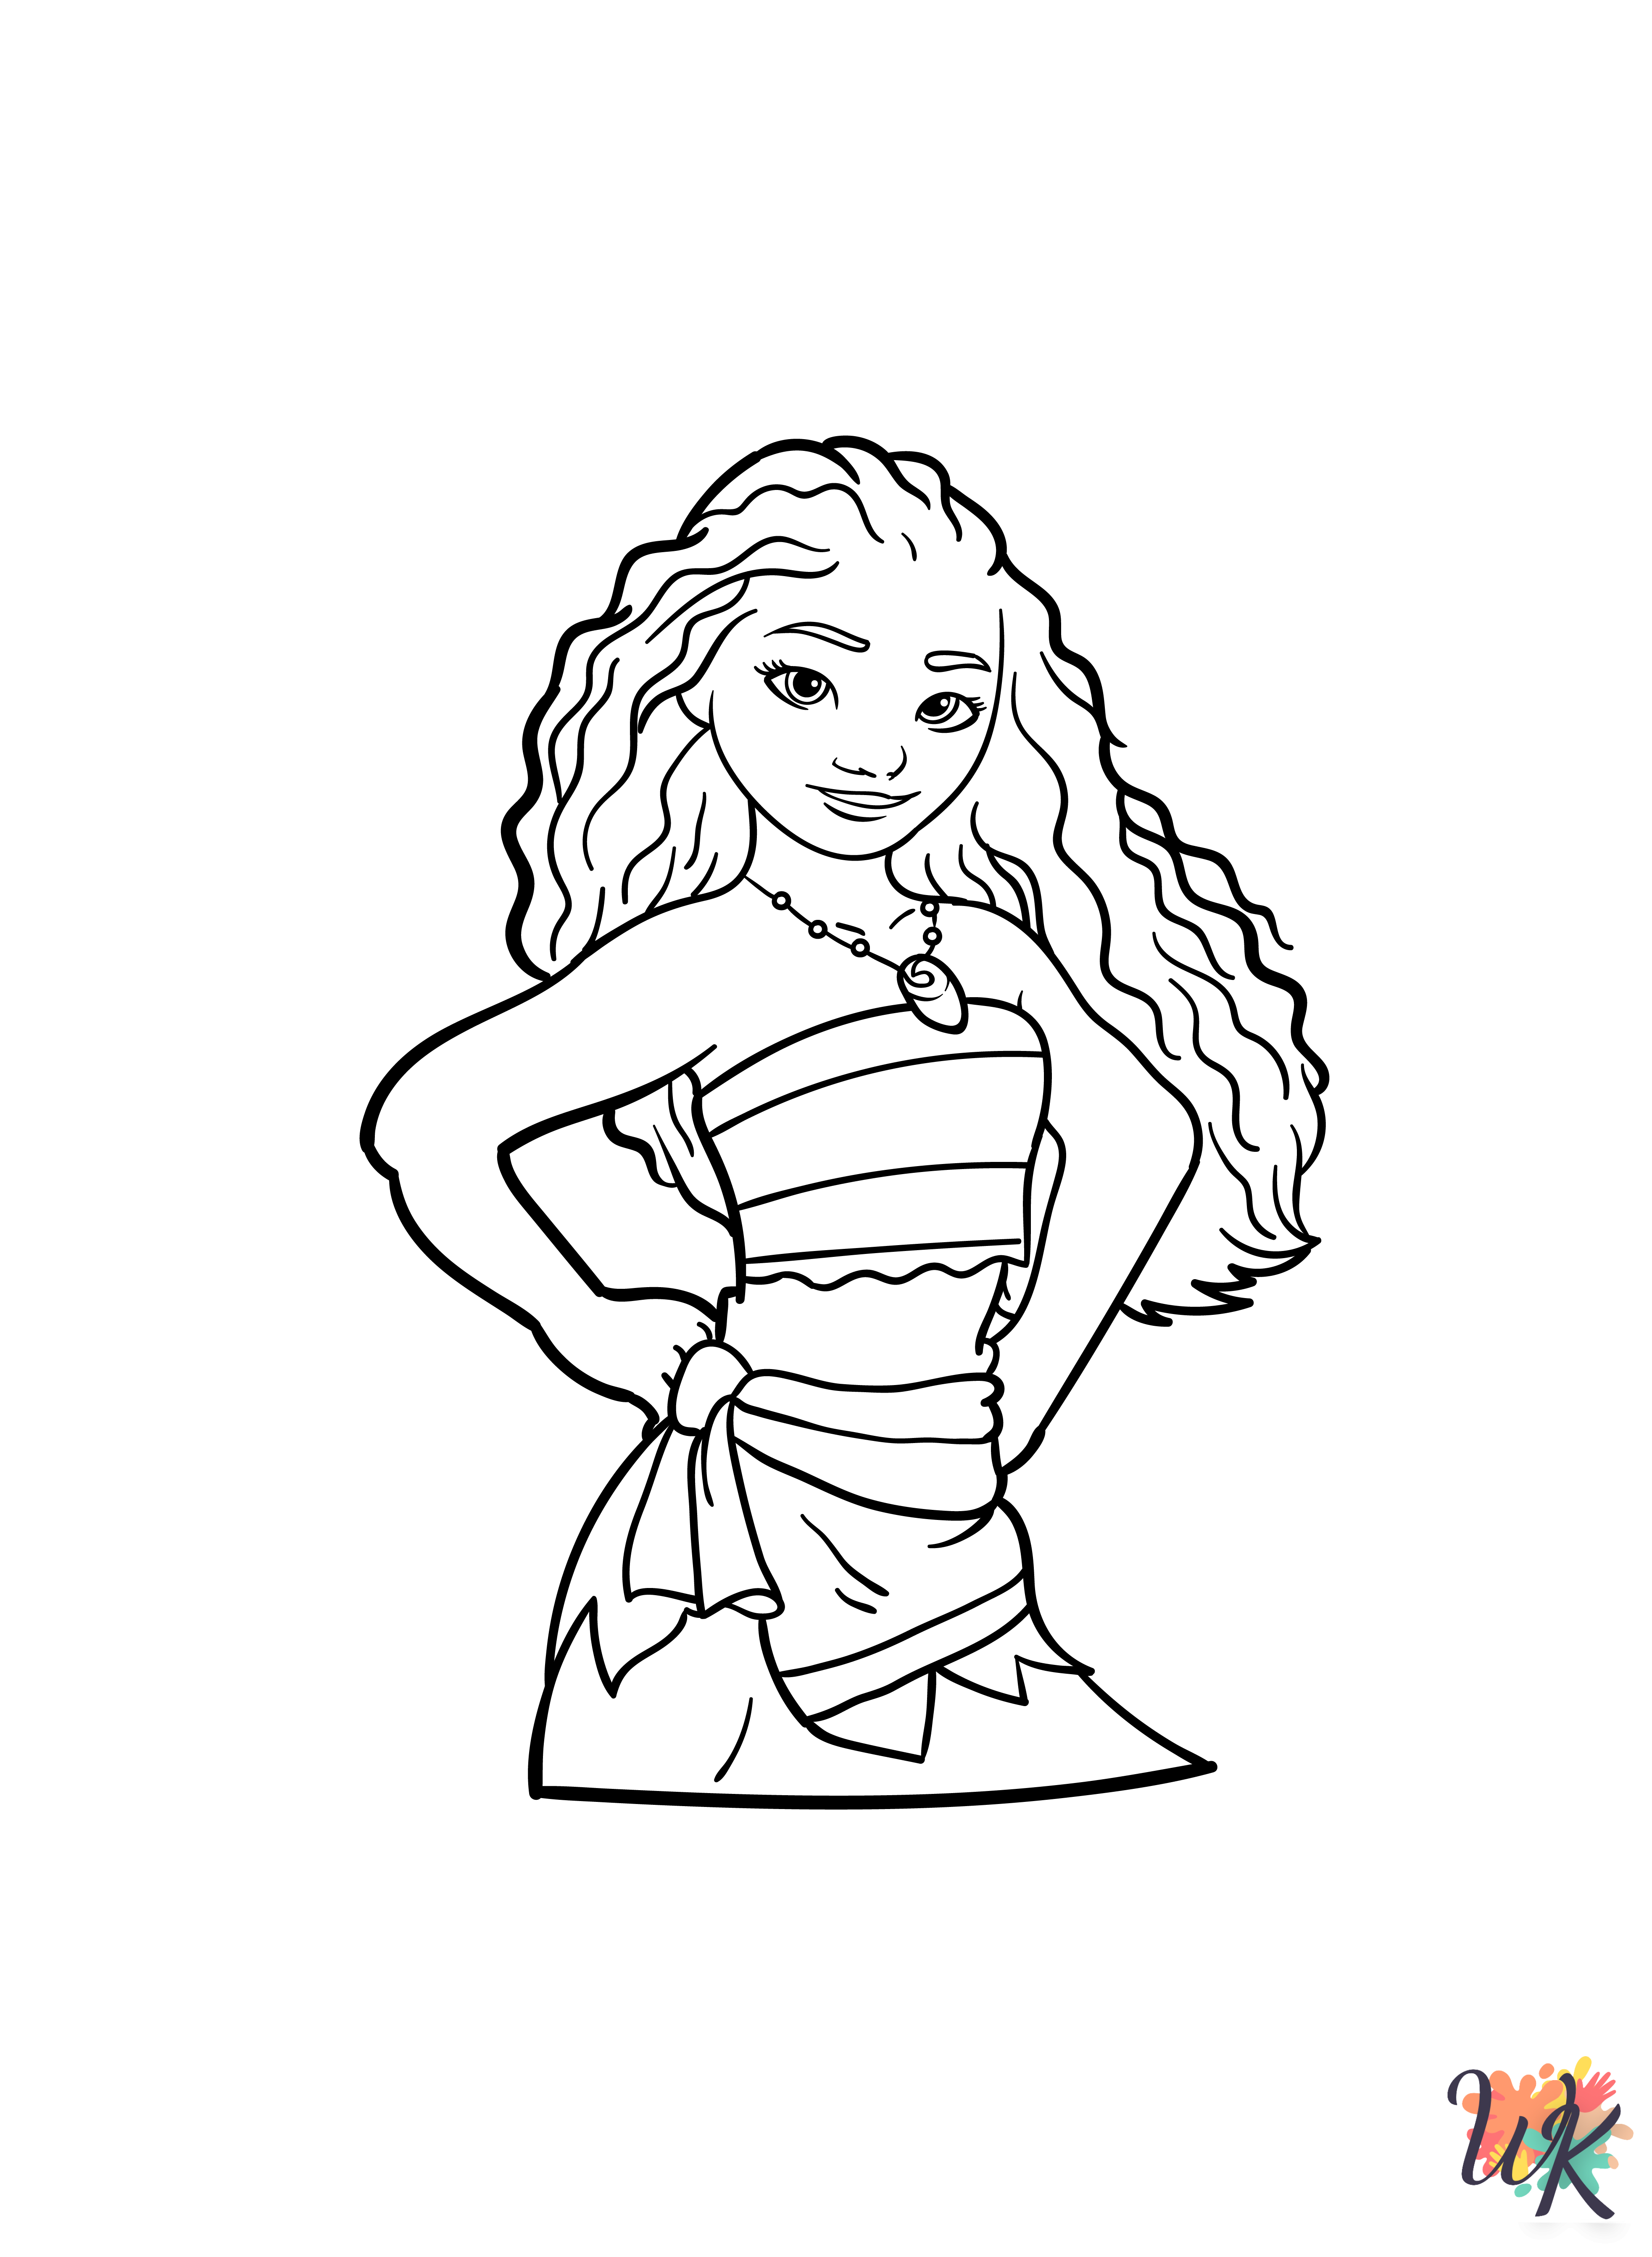 Moana coloring pages for adults easy